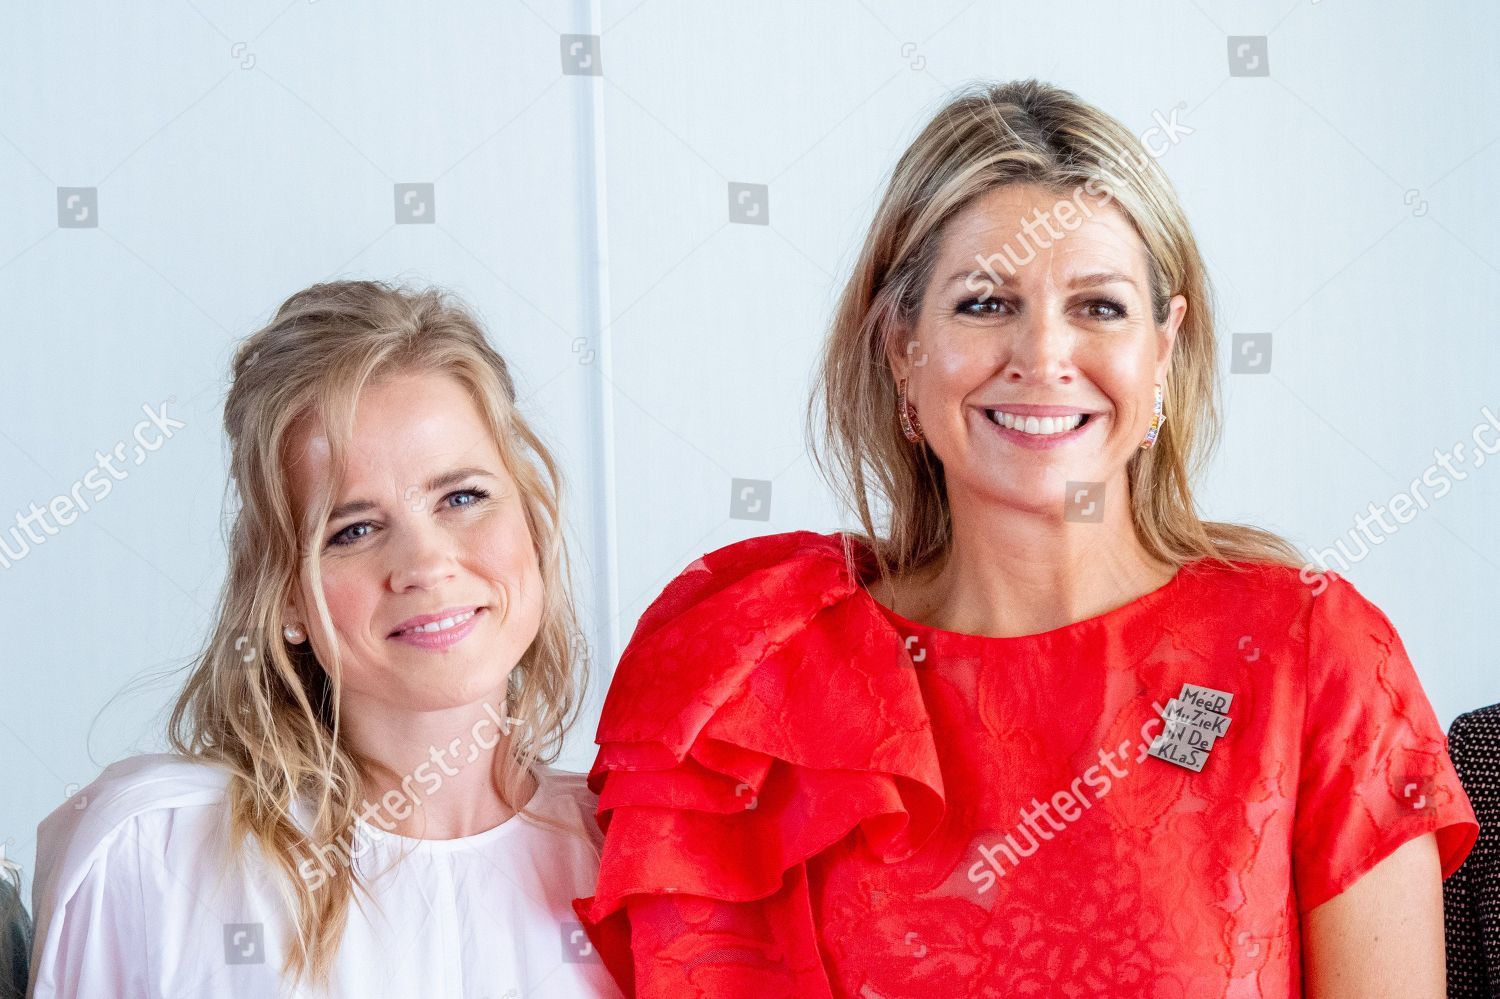 queen-maxima-signing-the-more-music-covenant-in-the-classroom-drenthe-the-netherlands-shutterstock-editorial-10317631m.jpg